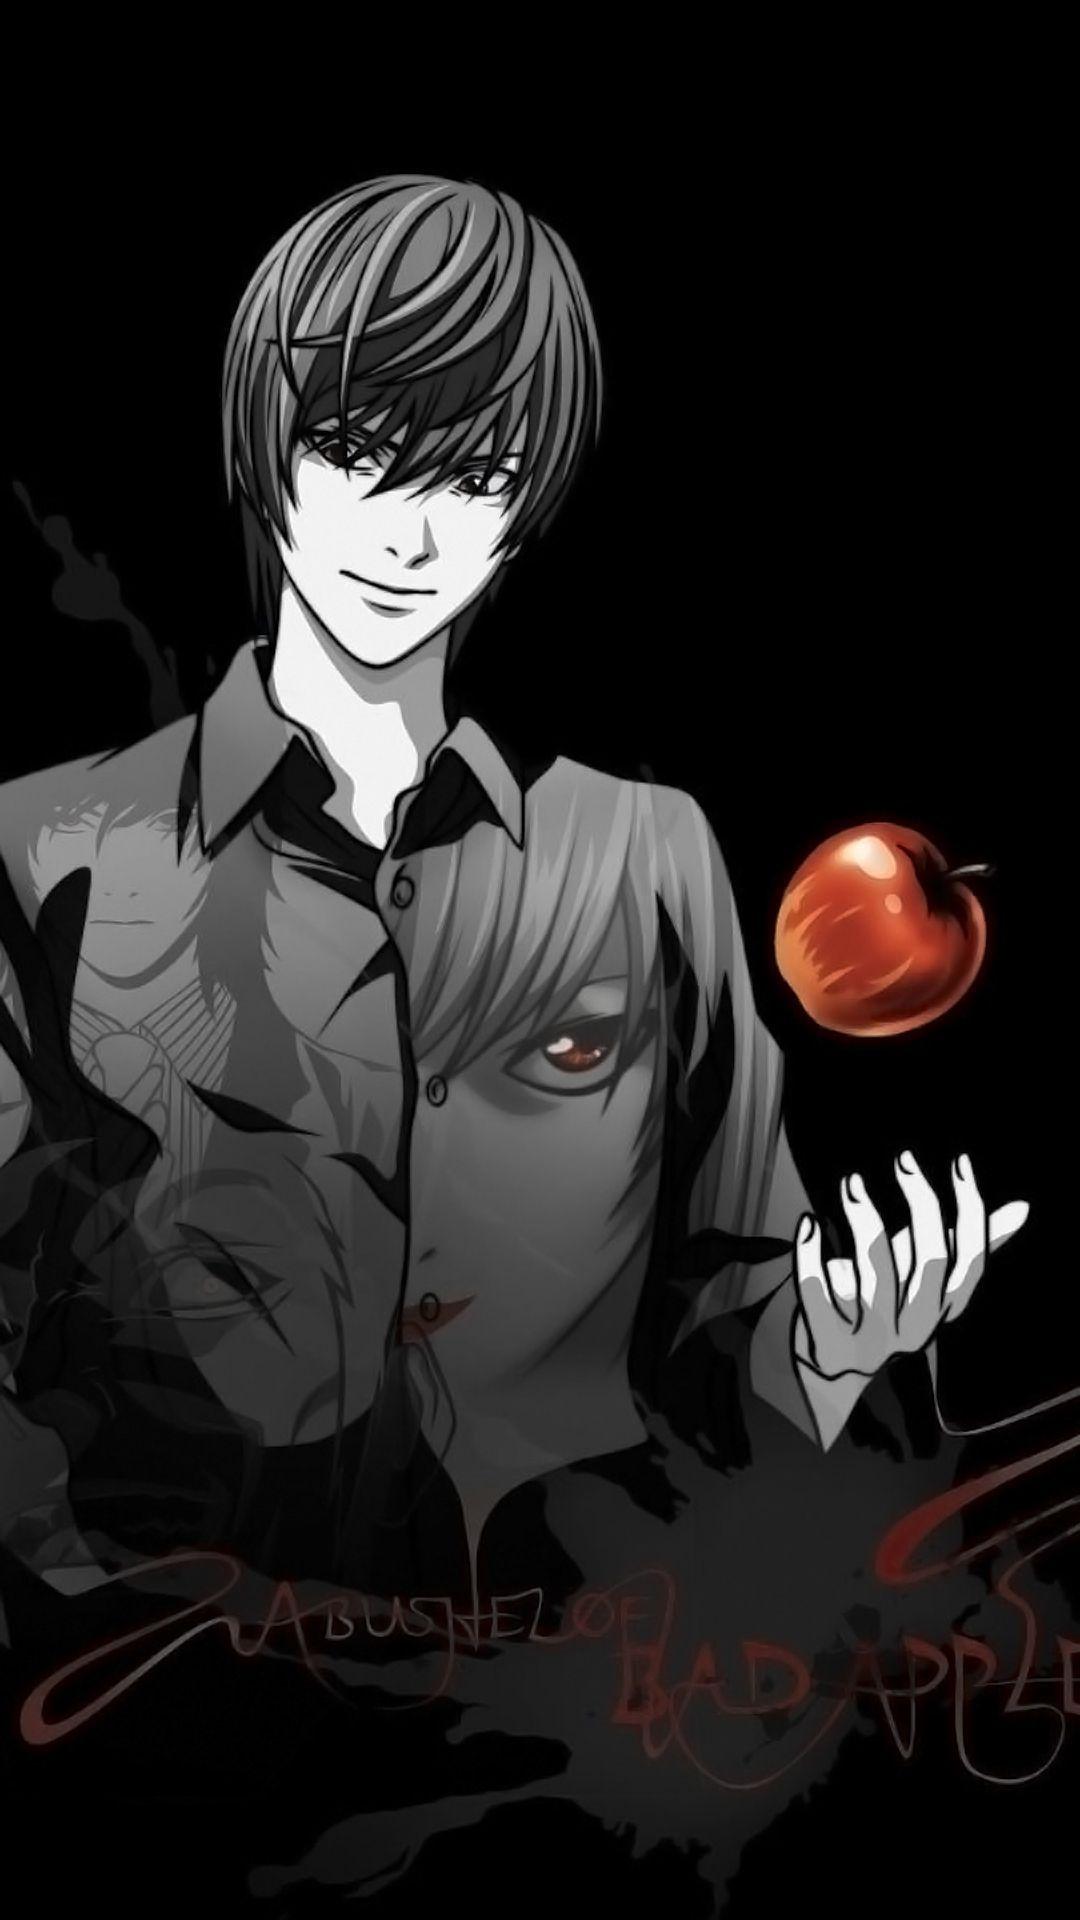 Amoled Death Note Mobile Wallpapers - Wallpaper Cave